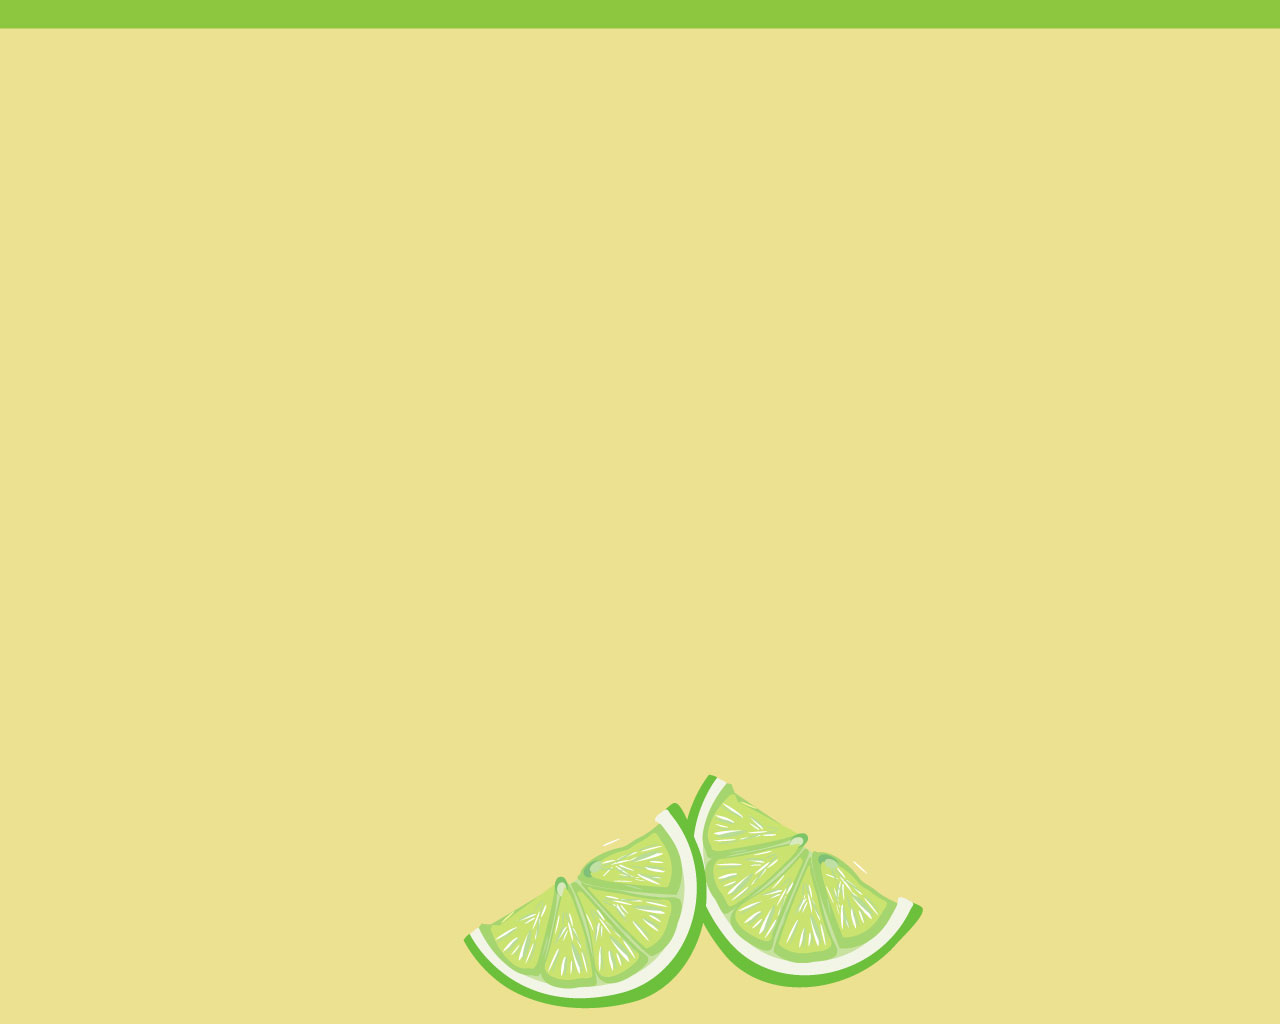 Lemon two slices free powerpoint background